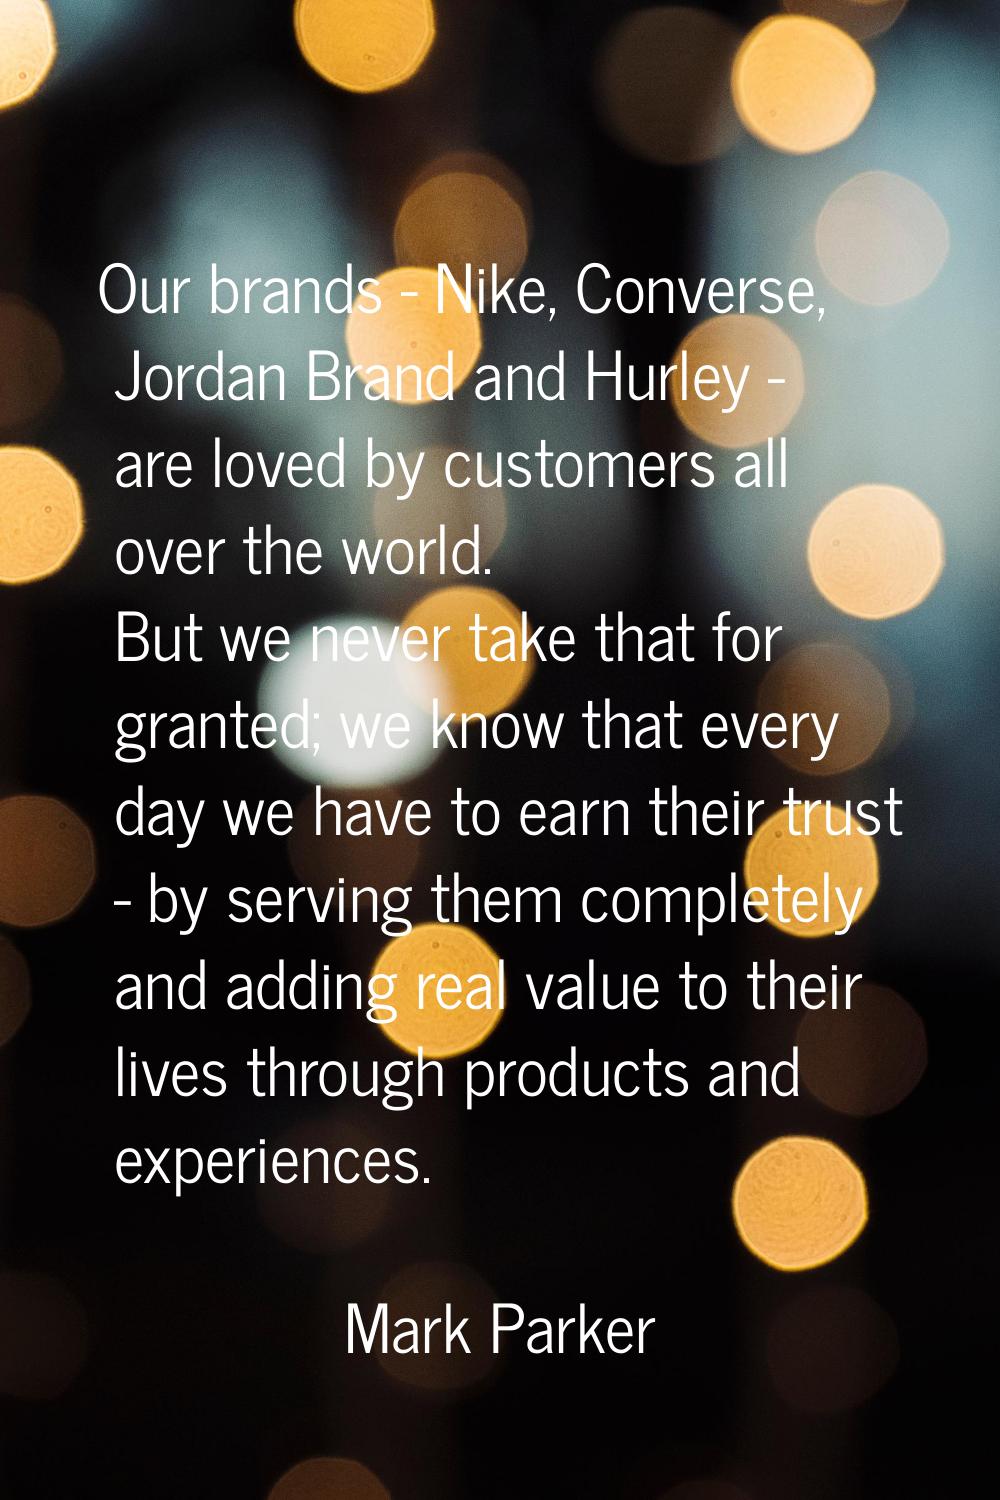 Our brands - Nike, Converse, Jordan Brand and Hurley - are loved by customers all over the world. B